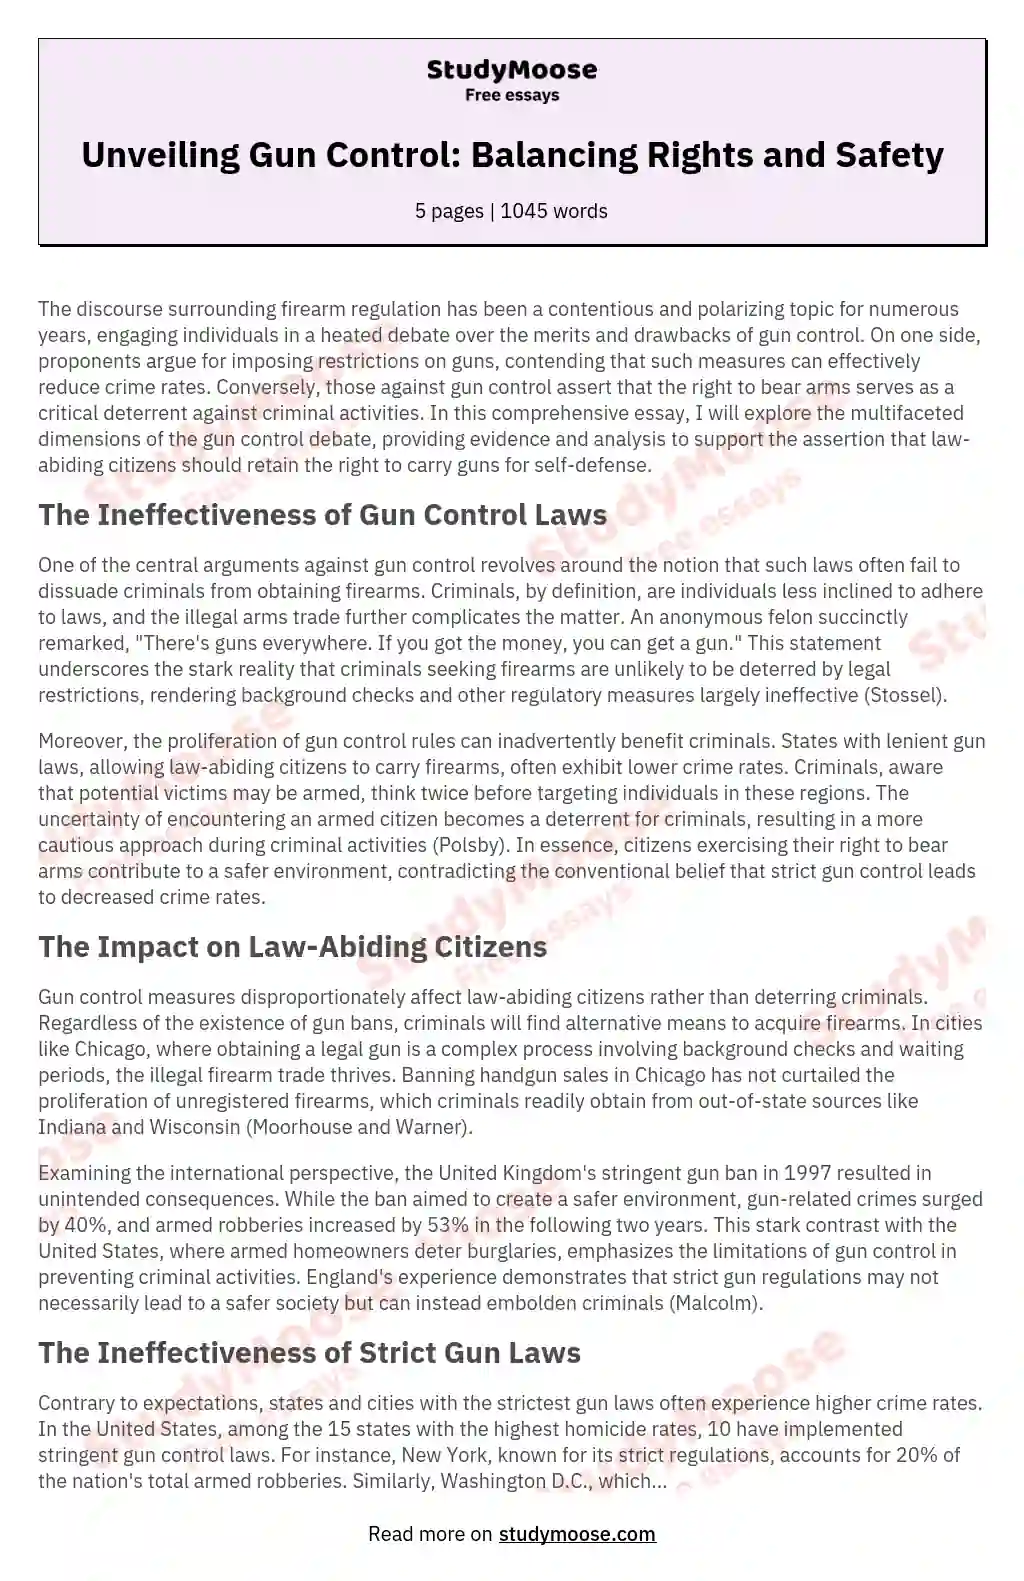 Unveiling Gun Control: Balancing Rights and Safety essay